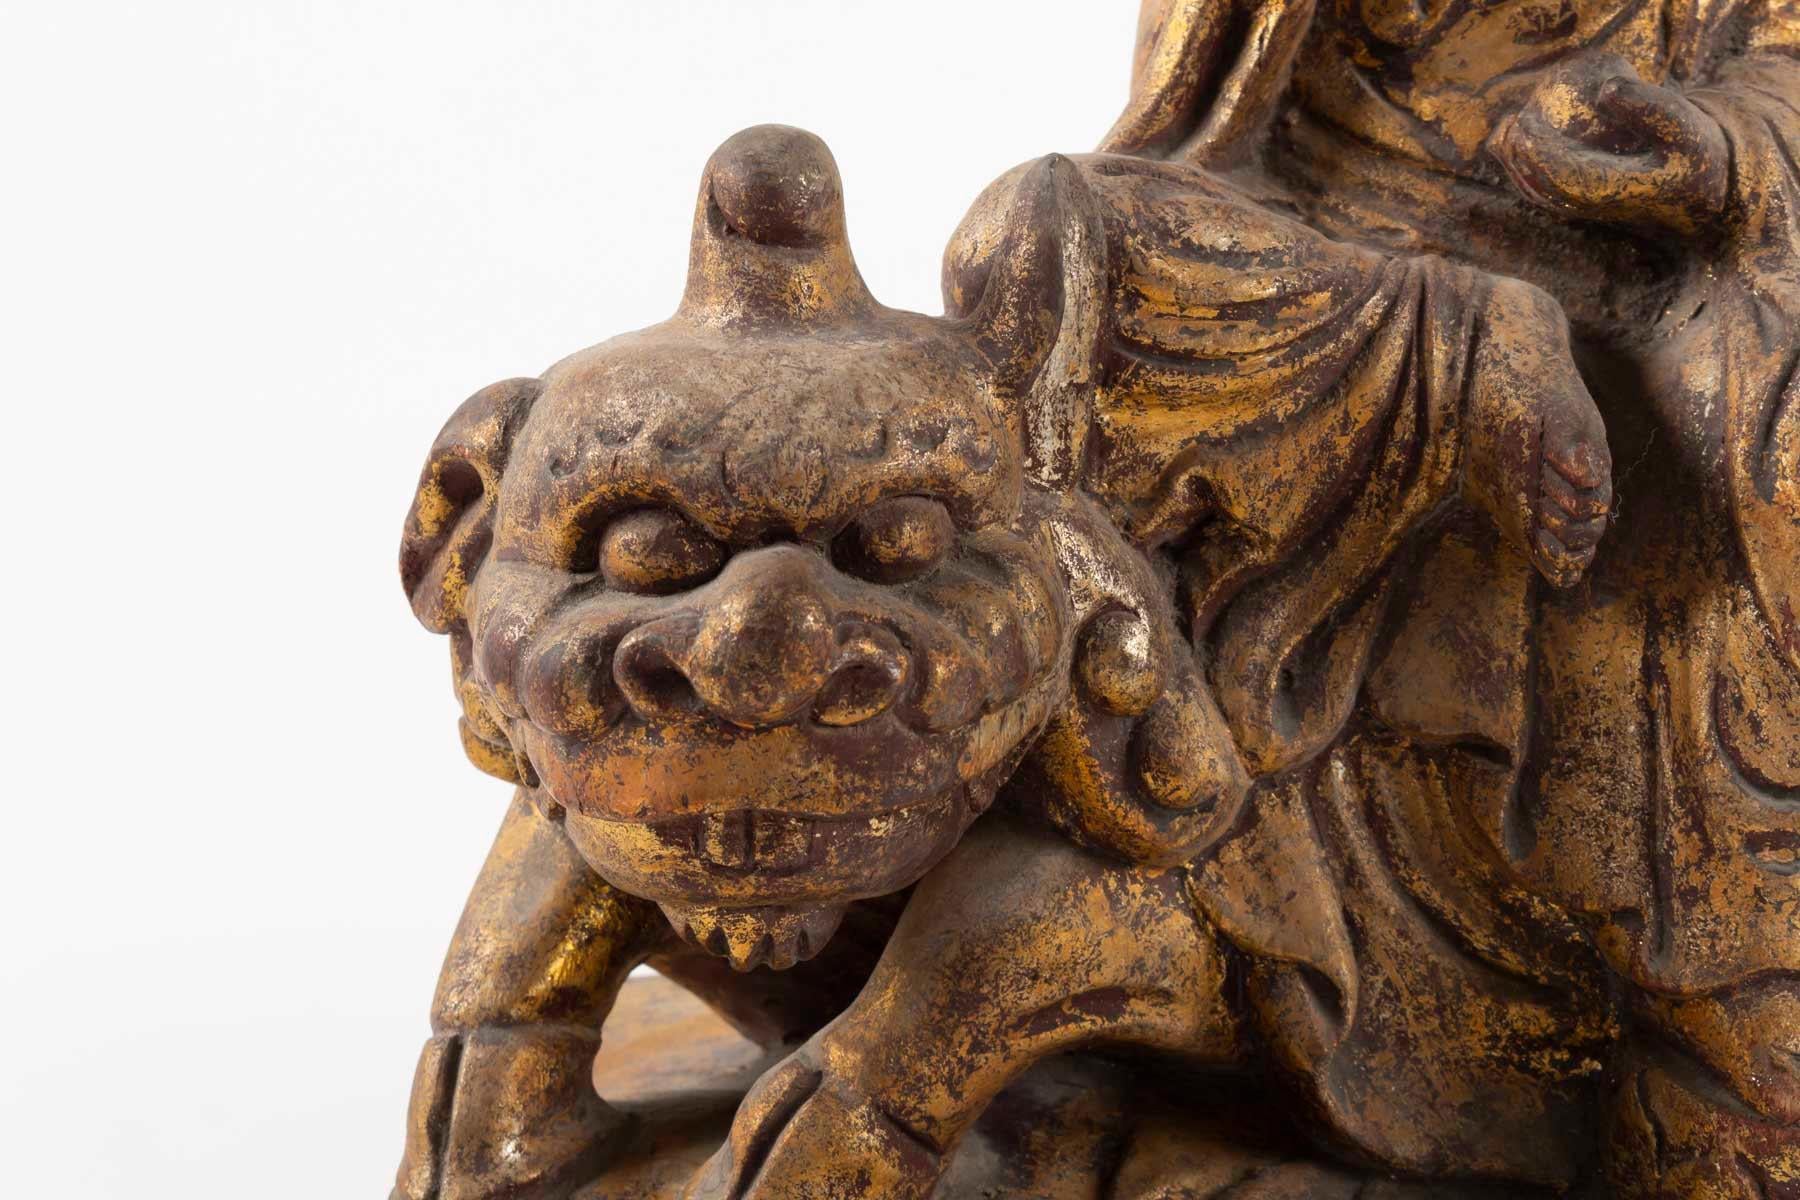 Golden wood Buddhist deity, seated on a lion, China, late 19th century
Measures: H 31cm, W 24cm, D 13cm.